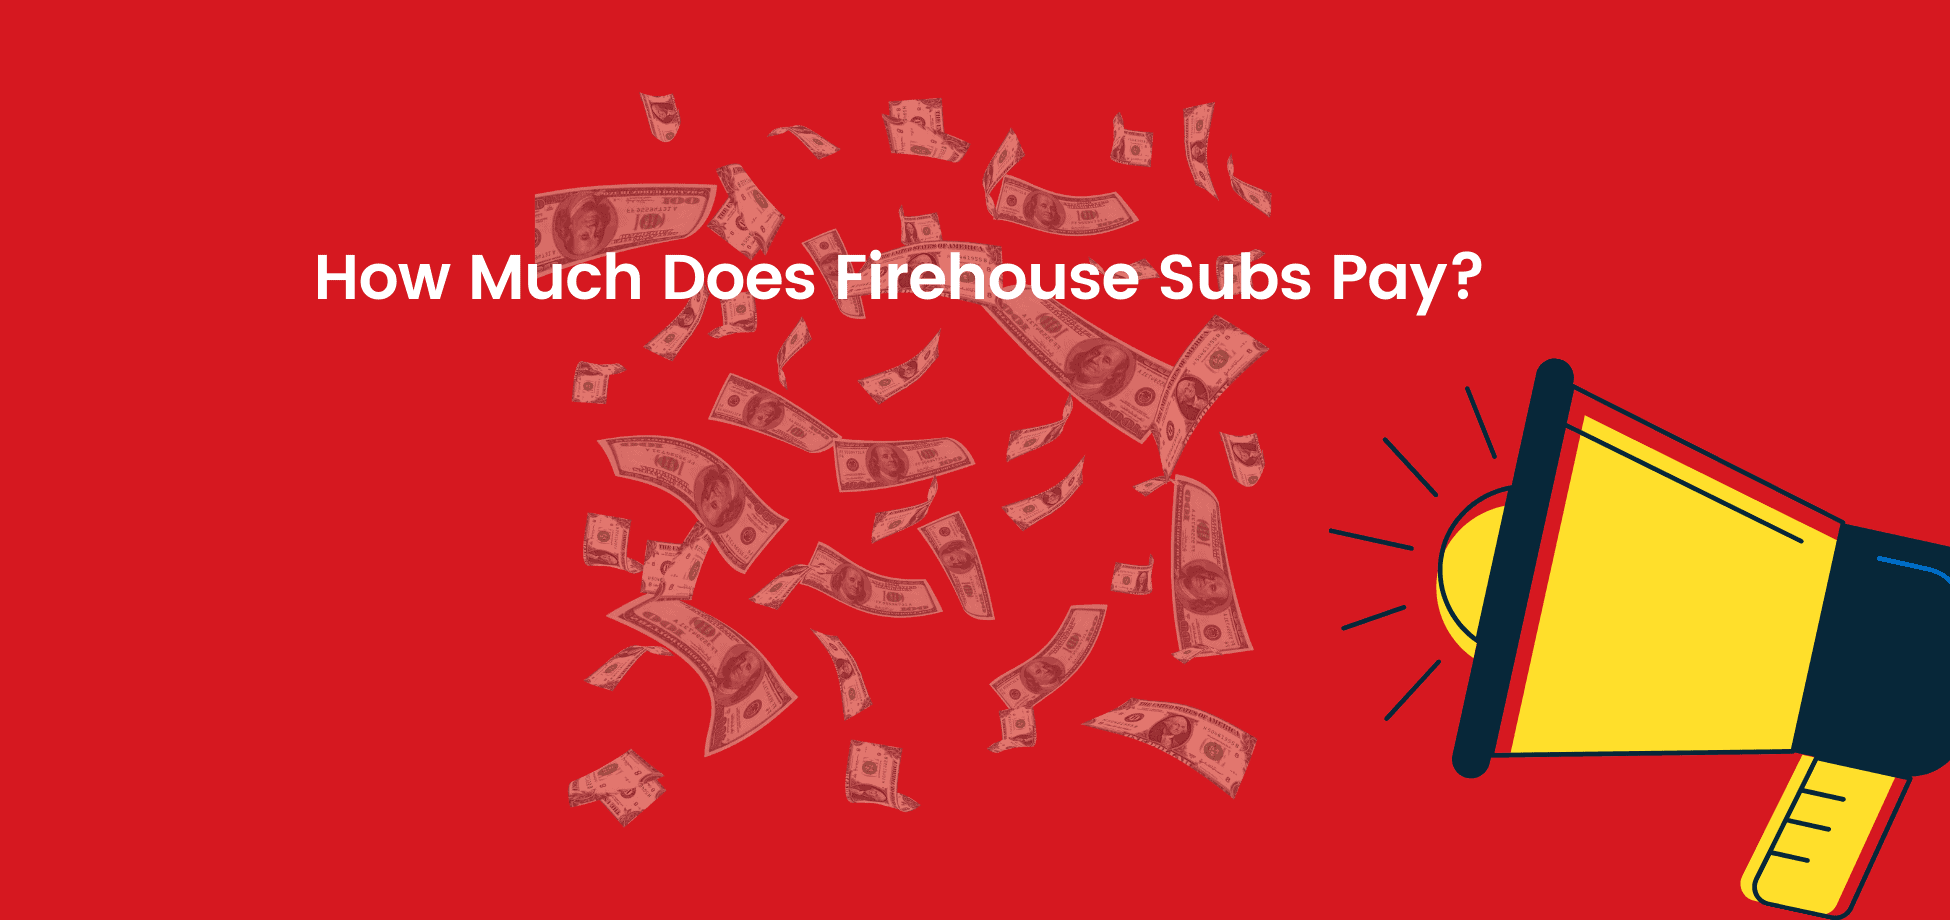 See the Firehouse subs starting and average pay.